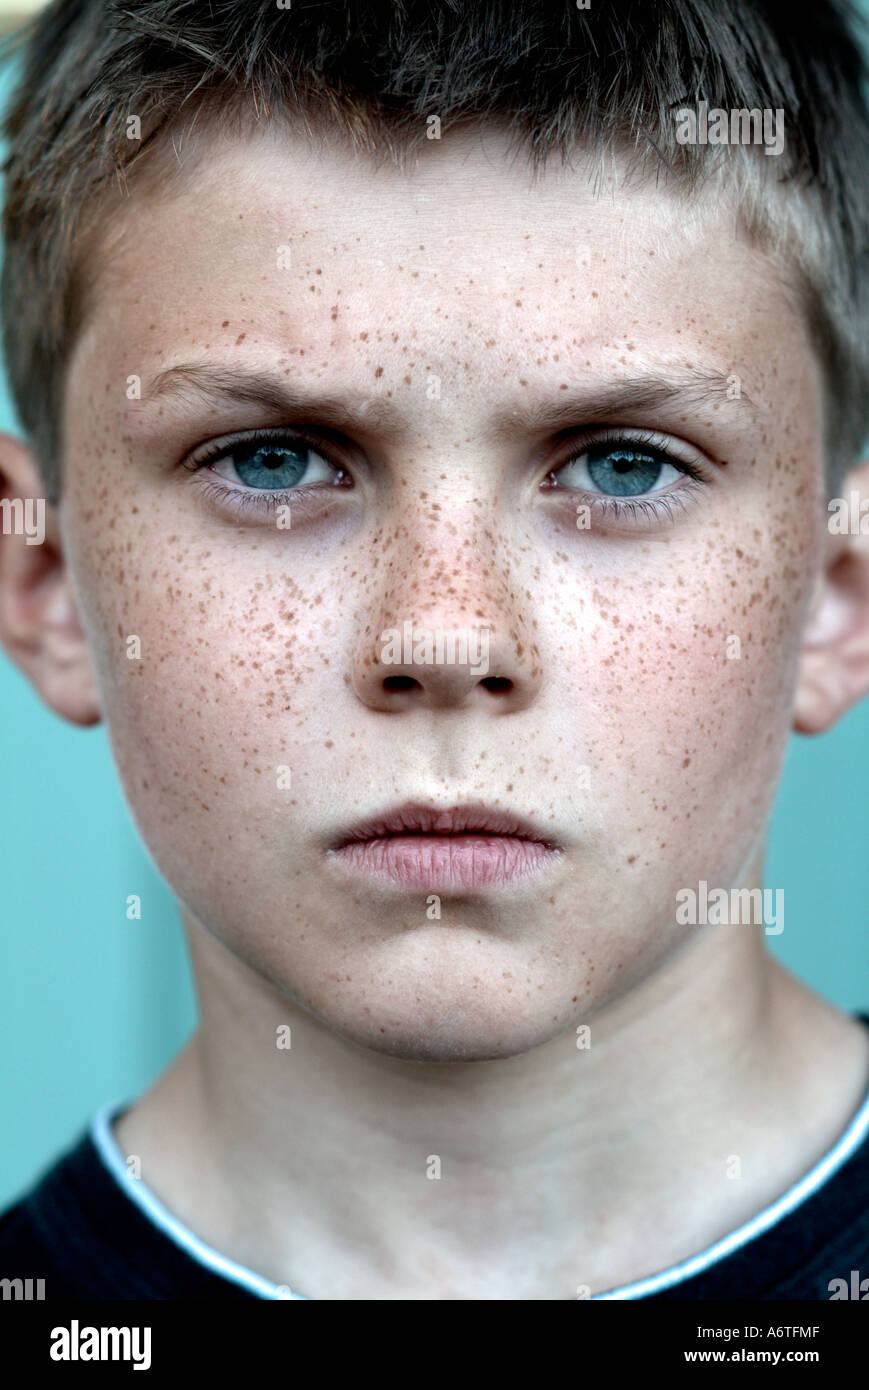 Portrait of a freckly boy with a serious expression on his face Stock Photo